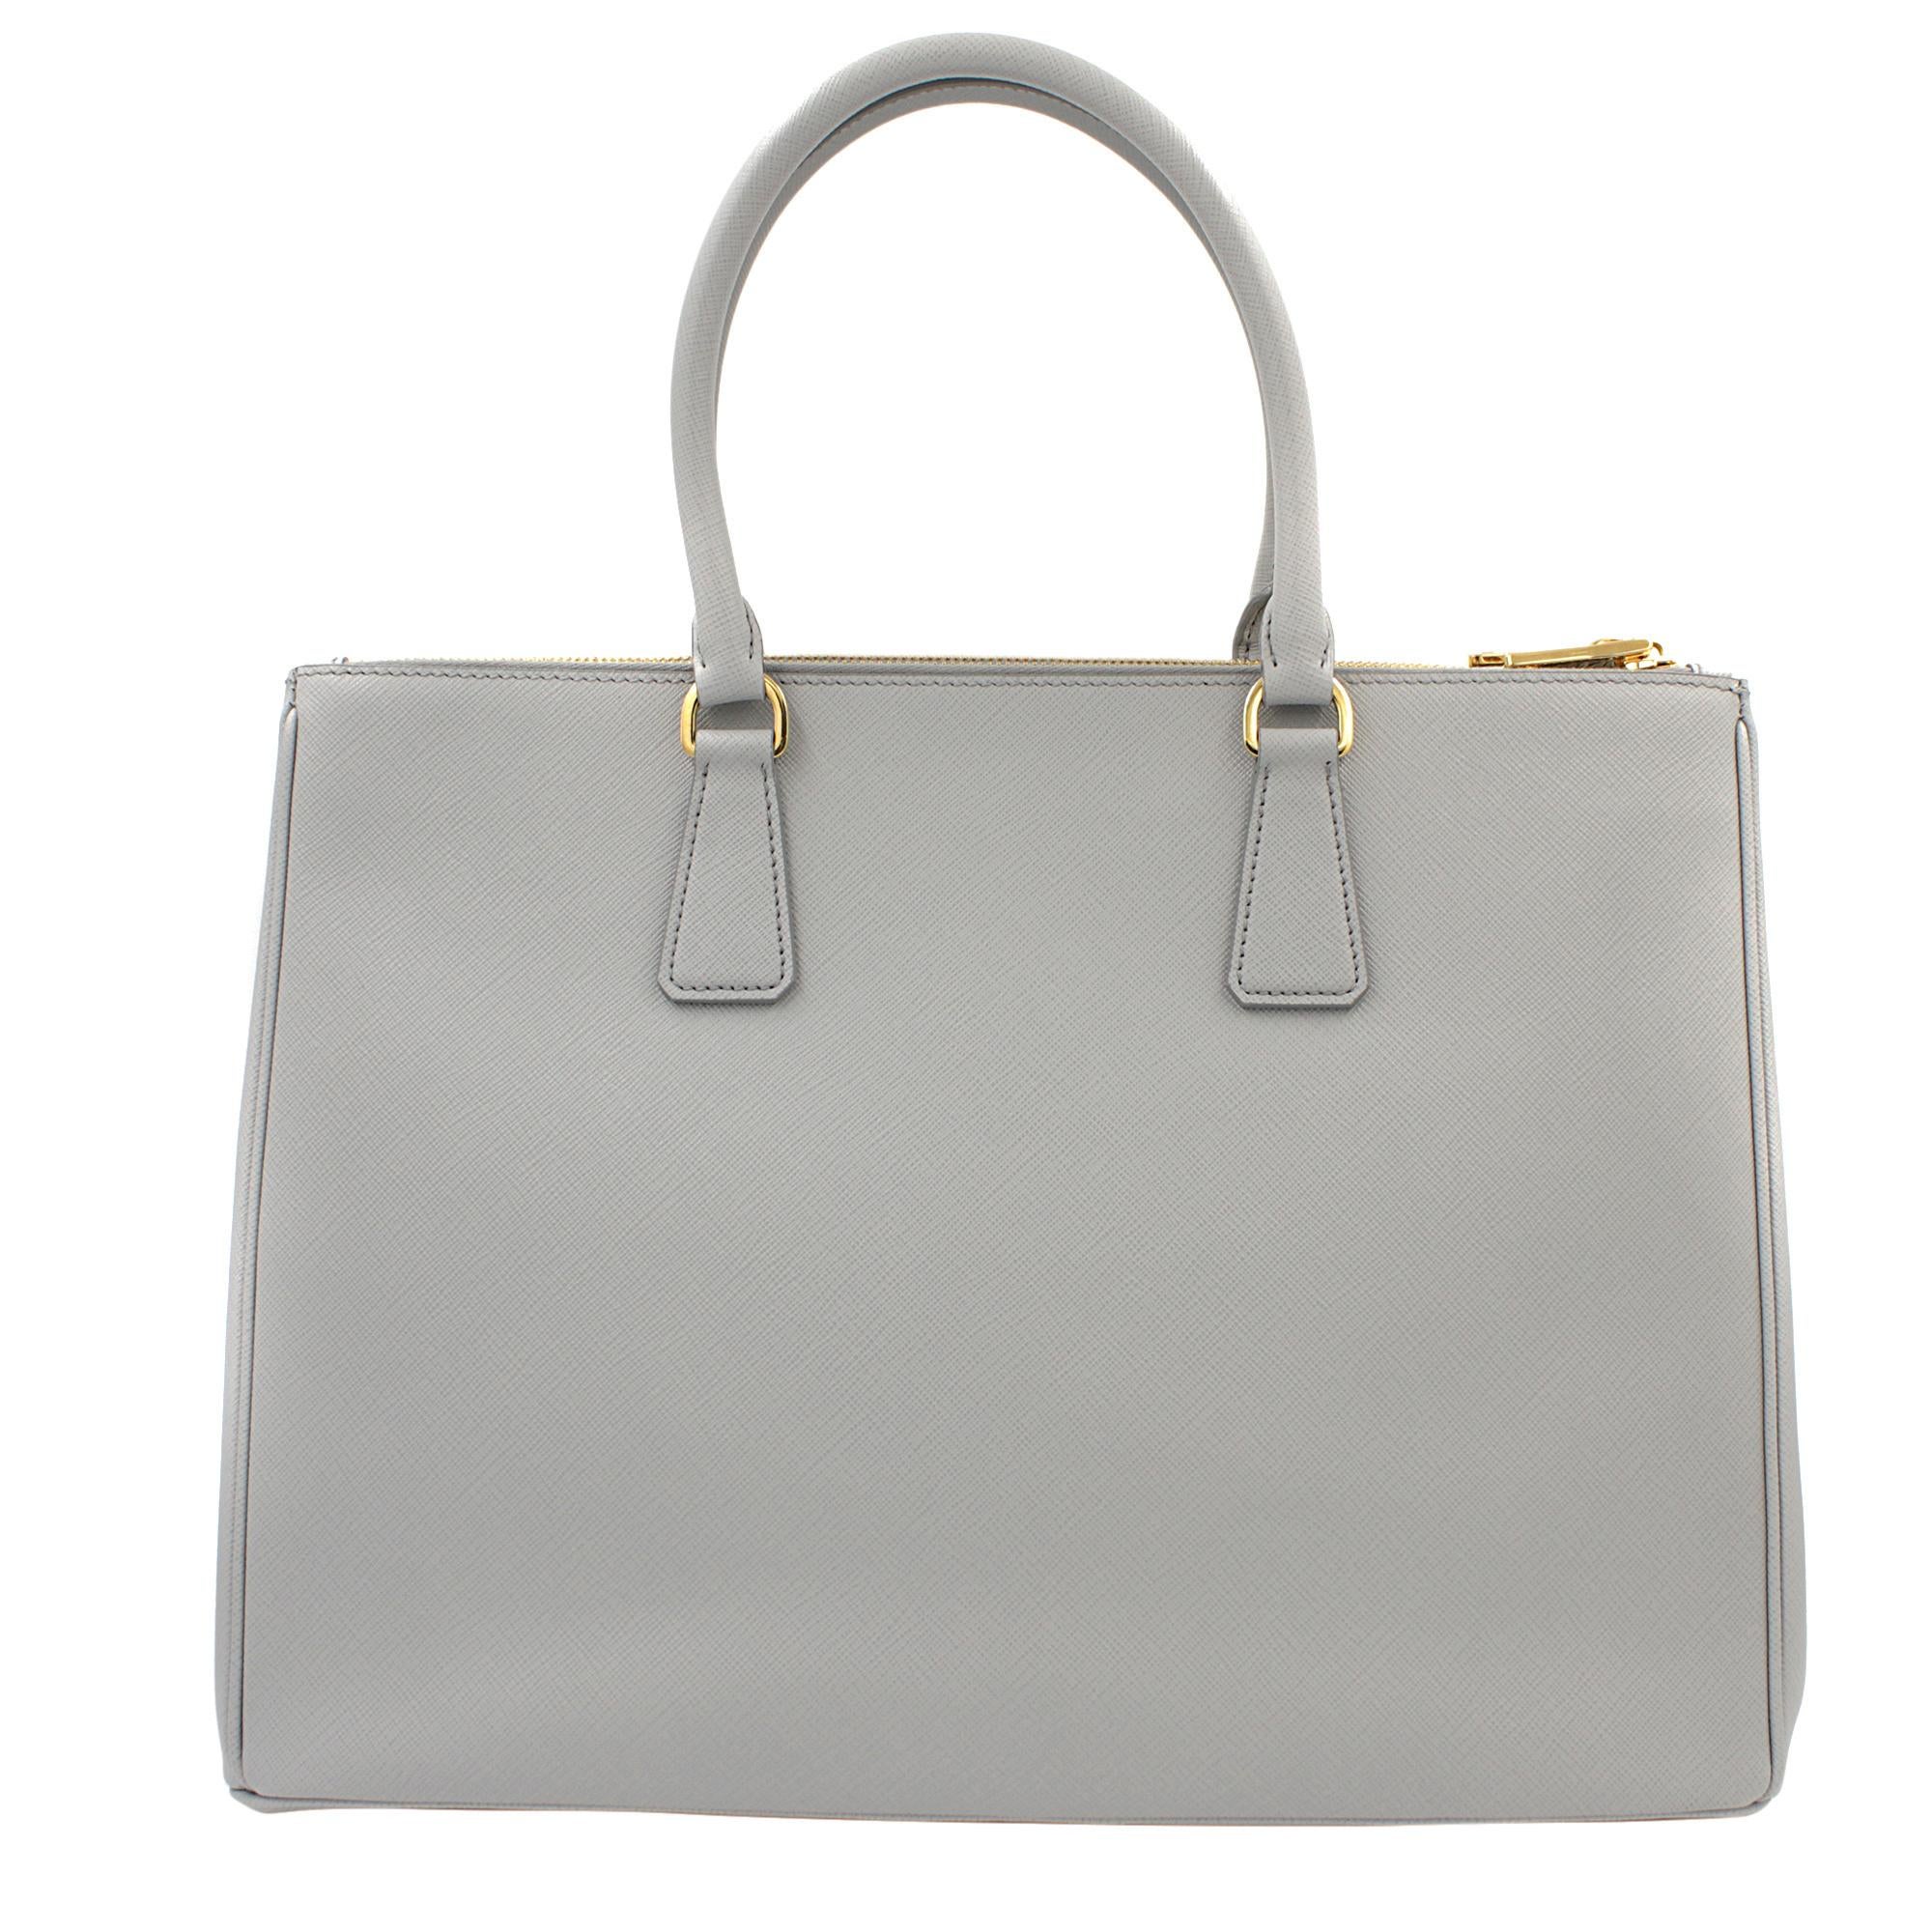 Prada's Galleria saffiano tote is a perfectly prim addition to your accessories edit. Crafted from textured gray calf leather, this design is finished with dainty top handles and golden hardware. Double storage compartments leave ample room for